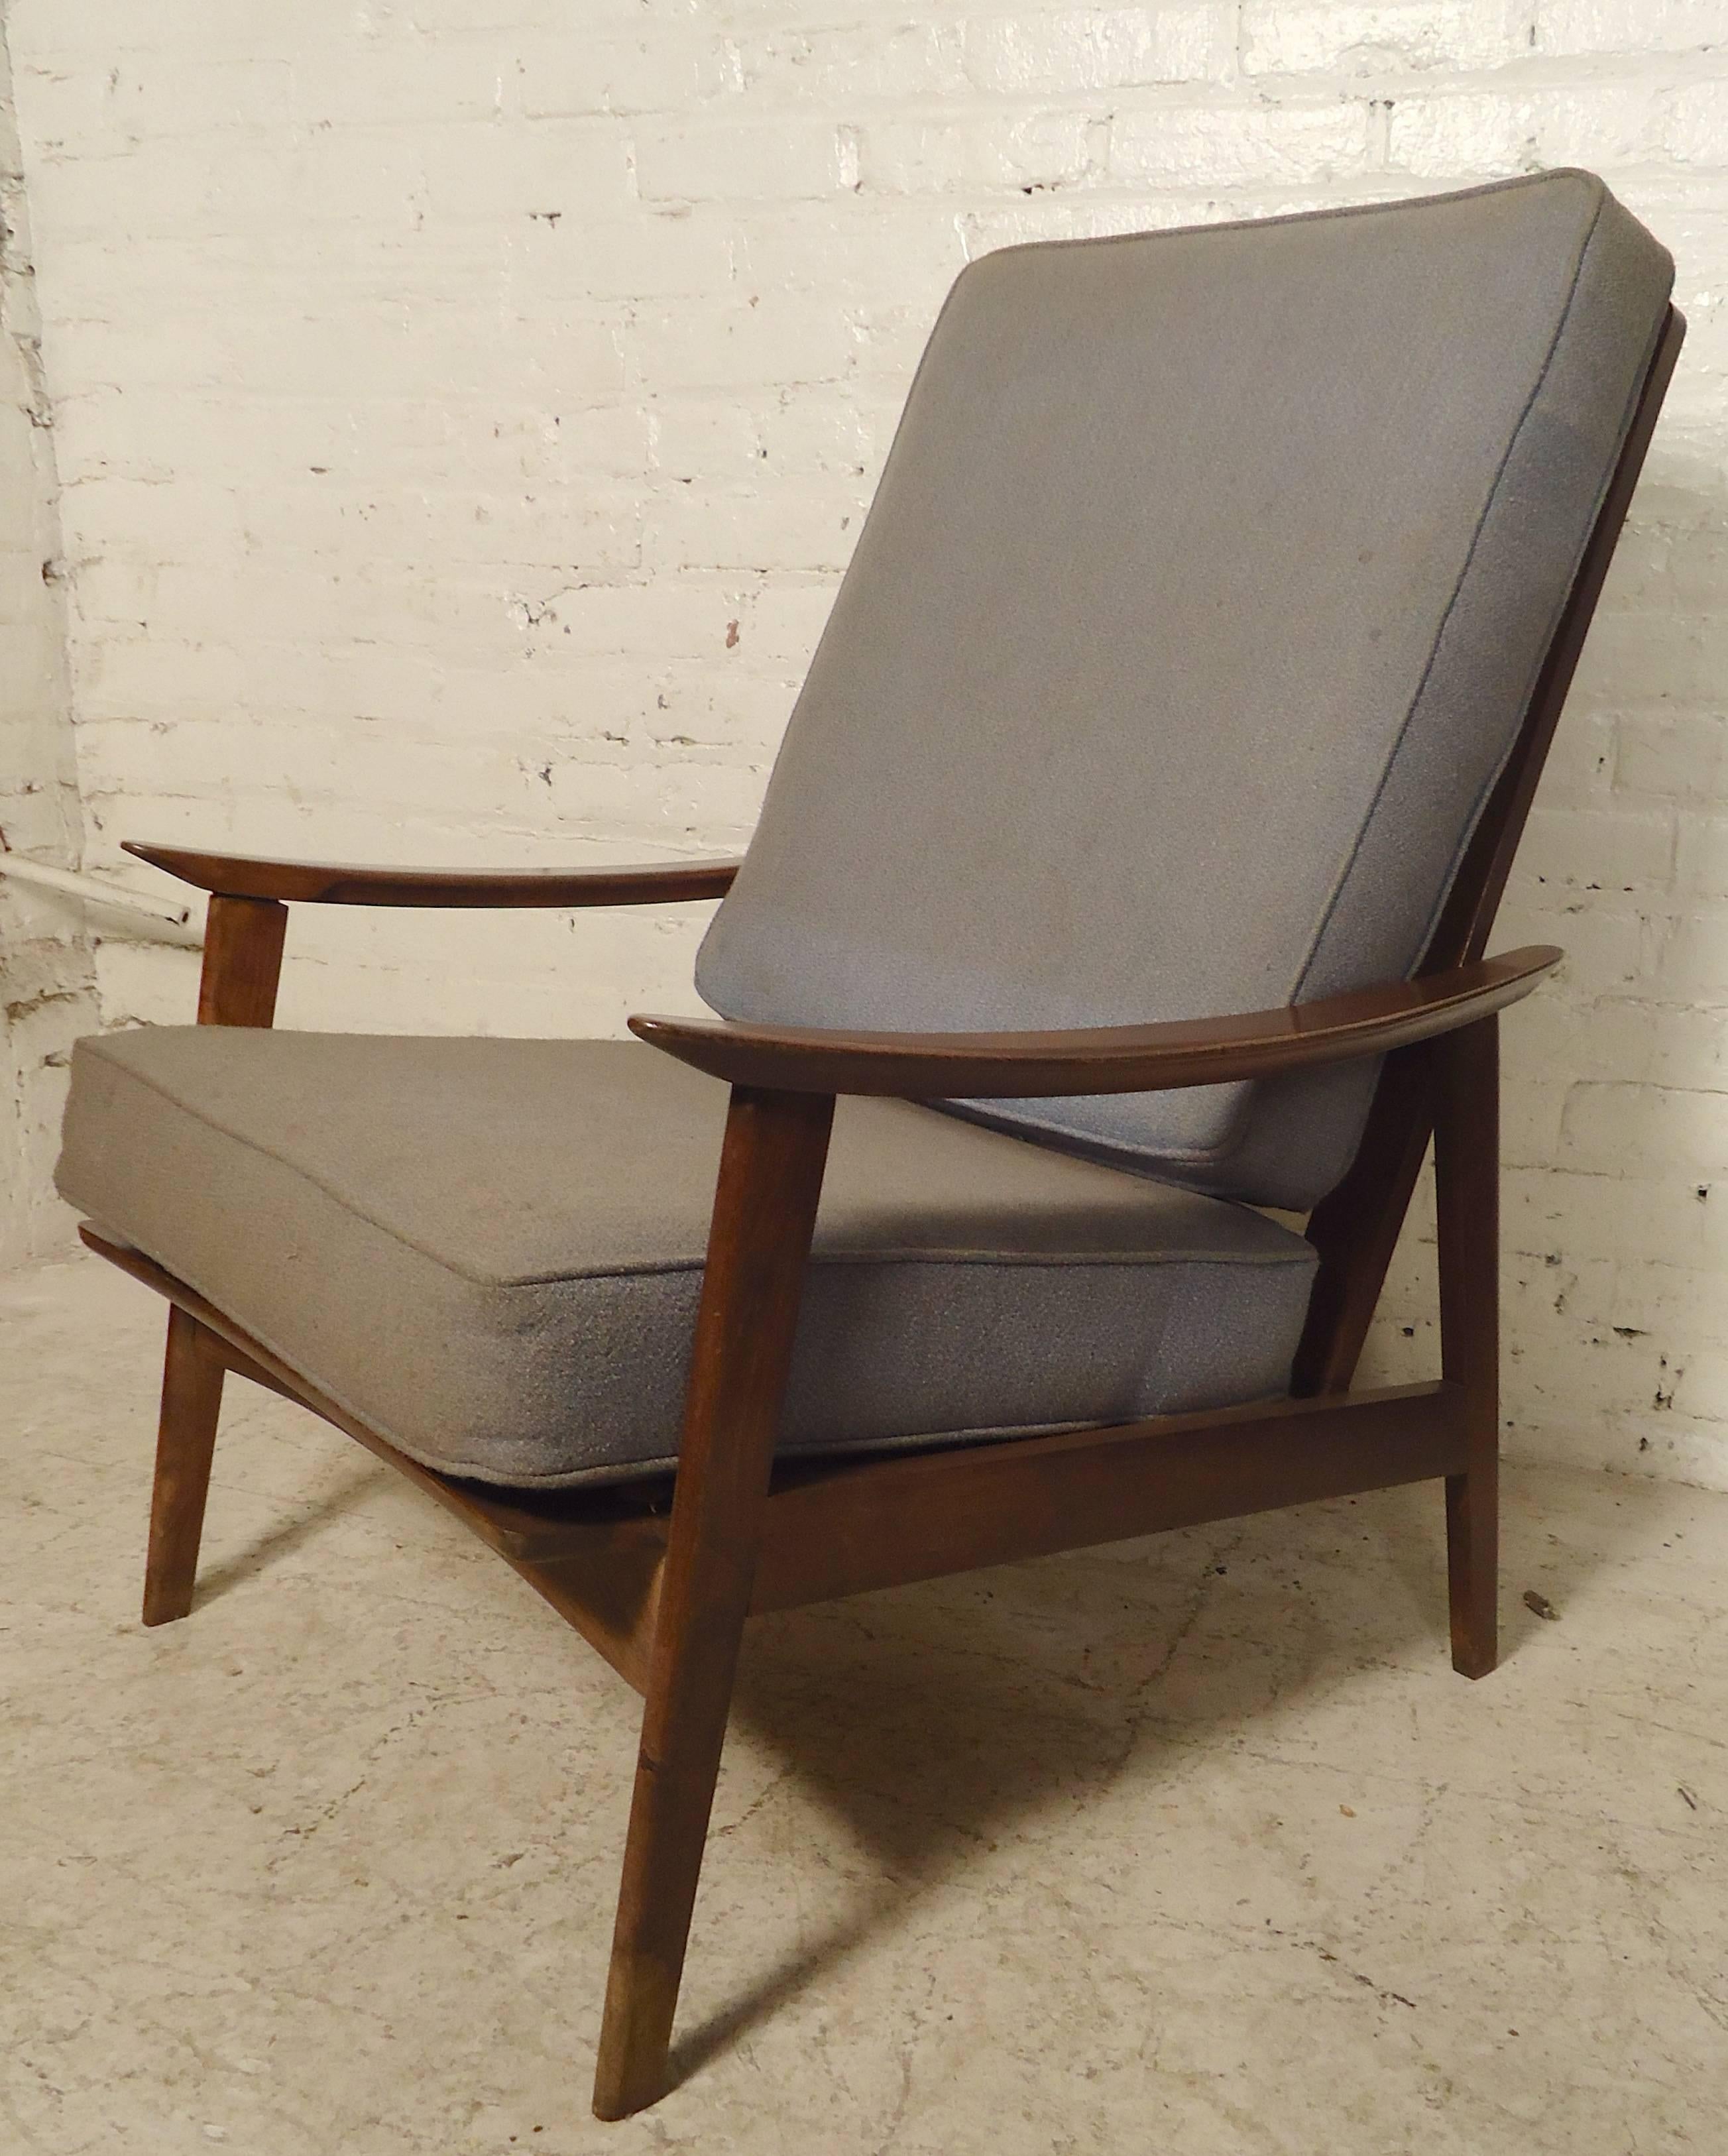 Lovely vintage modern wood frame chairs with sculpted arms, spindle backs and thick cushions. 

(Please confirm item location - NY or NJ - with dealer).
 